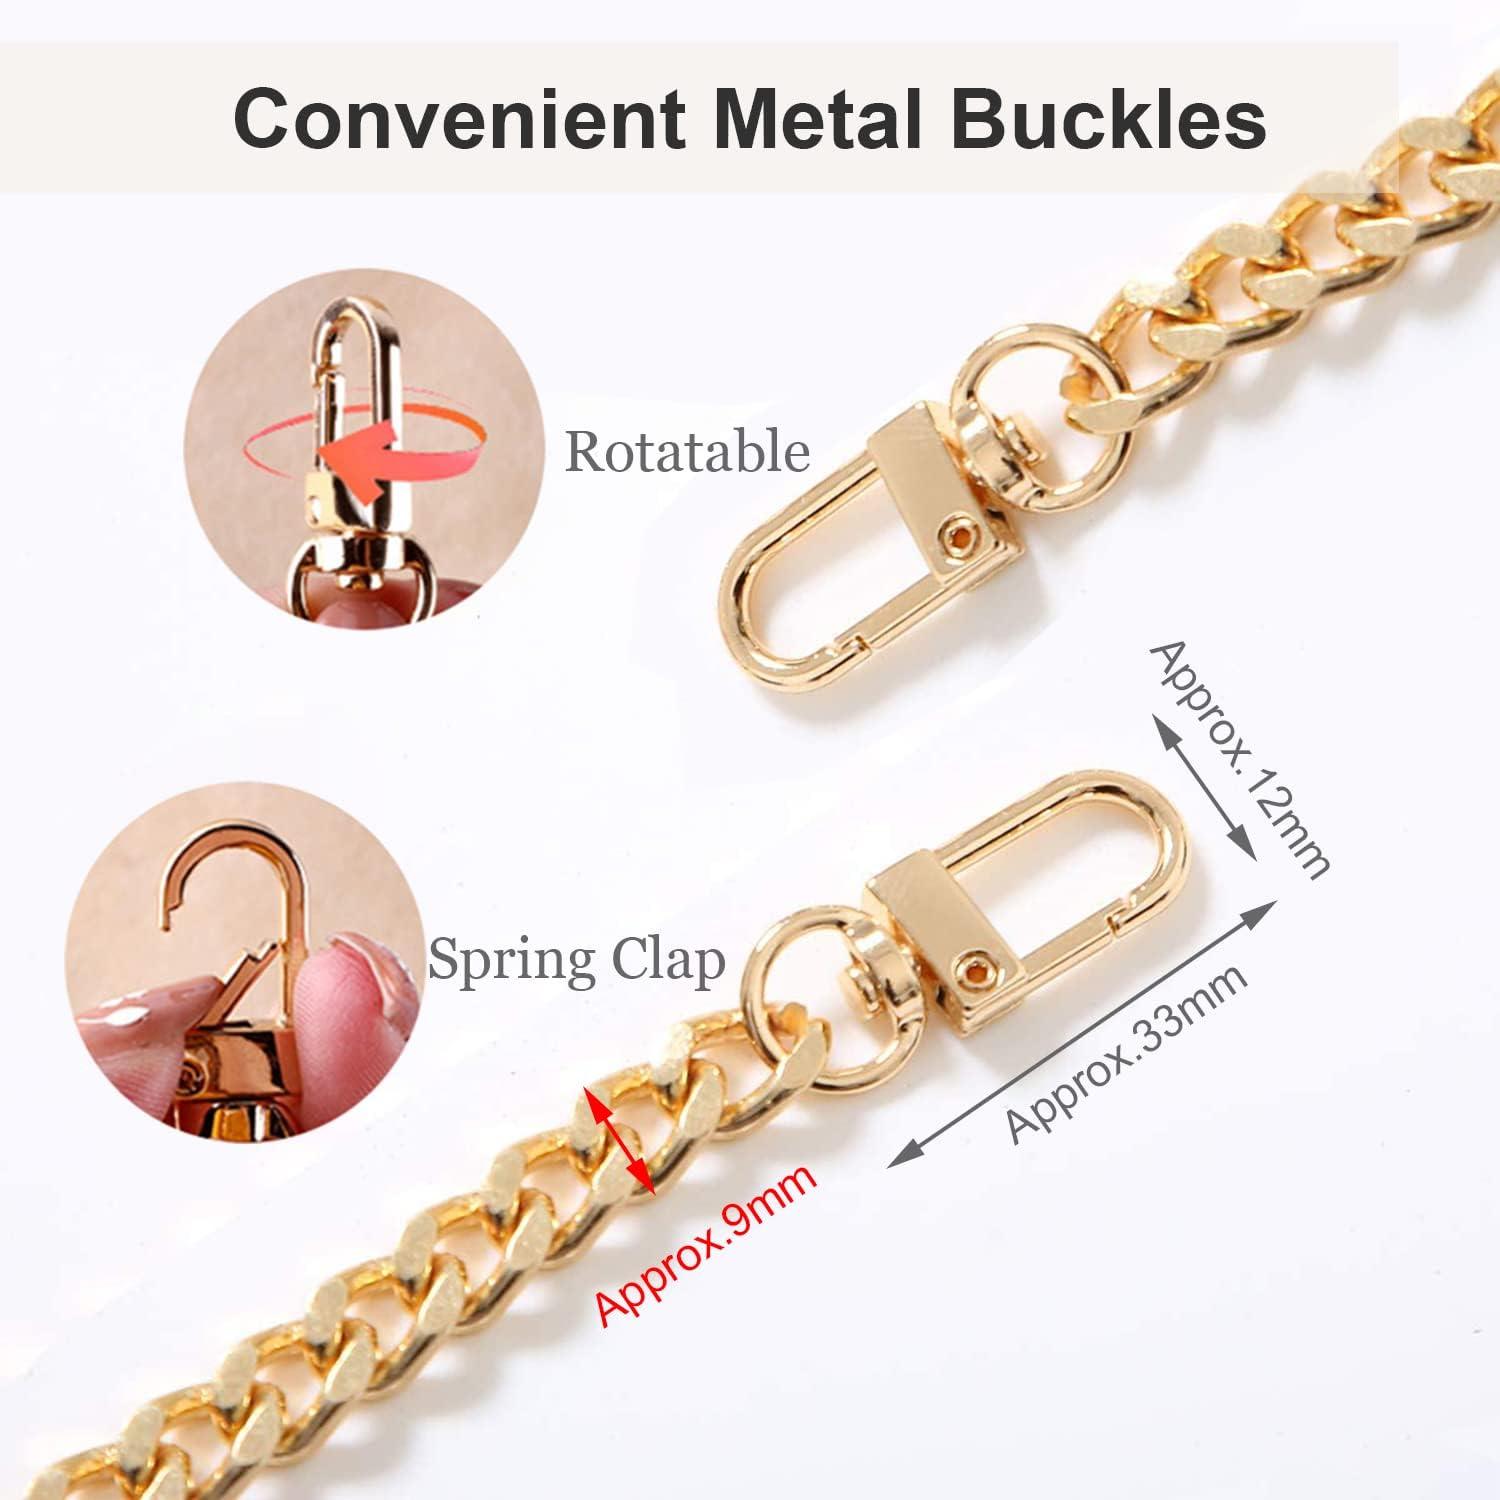 47 Inch Purse Chain Strap Shoulder Crossbody Replacement Straps with Metal  Buckles, Gold Chain Strap for Purse Crossbody Handbag (Gold)